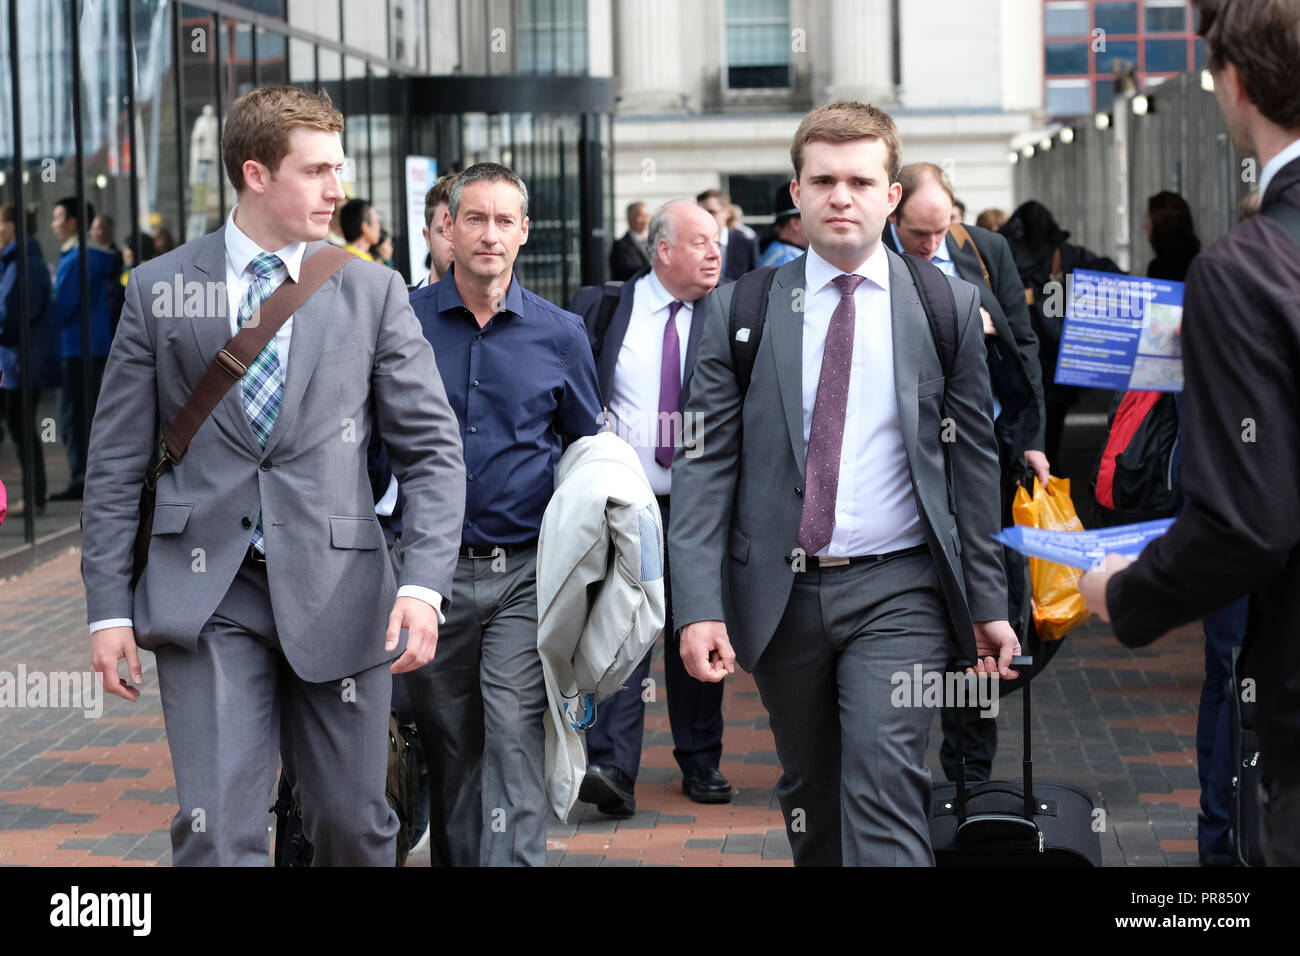 Birmingham, UK. 30th September 2018. Tory party delegates arrive for the first day of the Conservative Party Conference at the ICC in Birmingham  - Photo Steven May / Alamy Live News Stock Photo